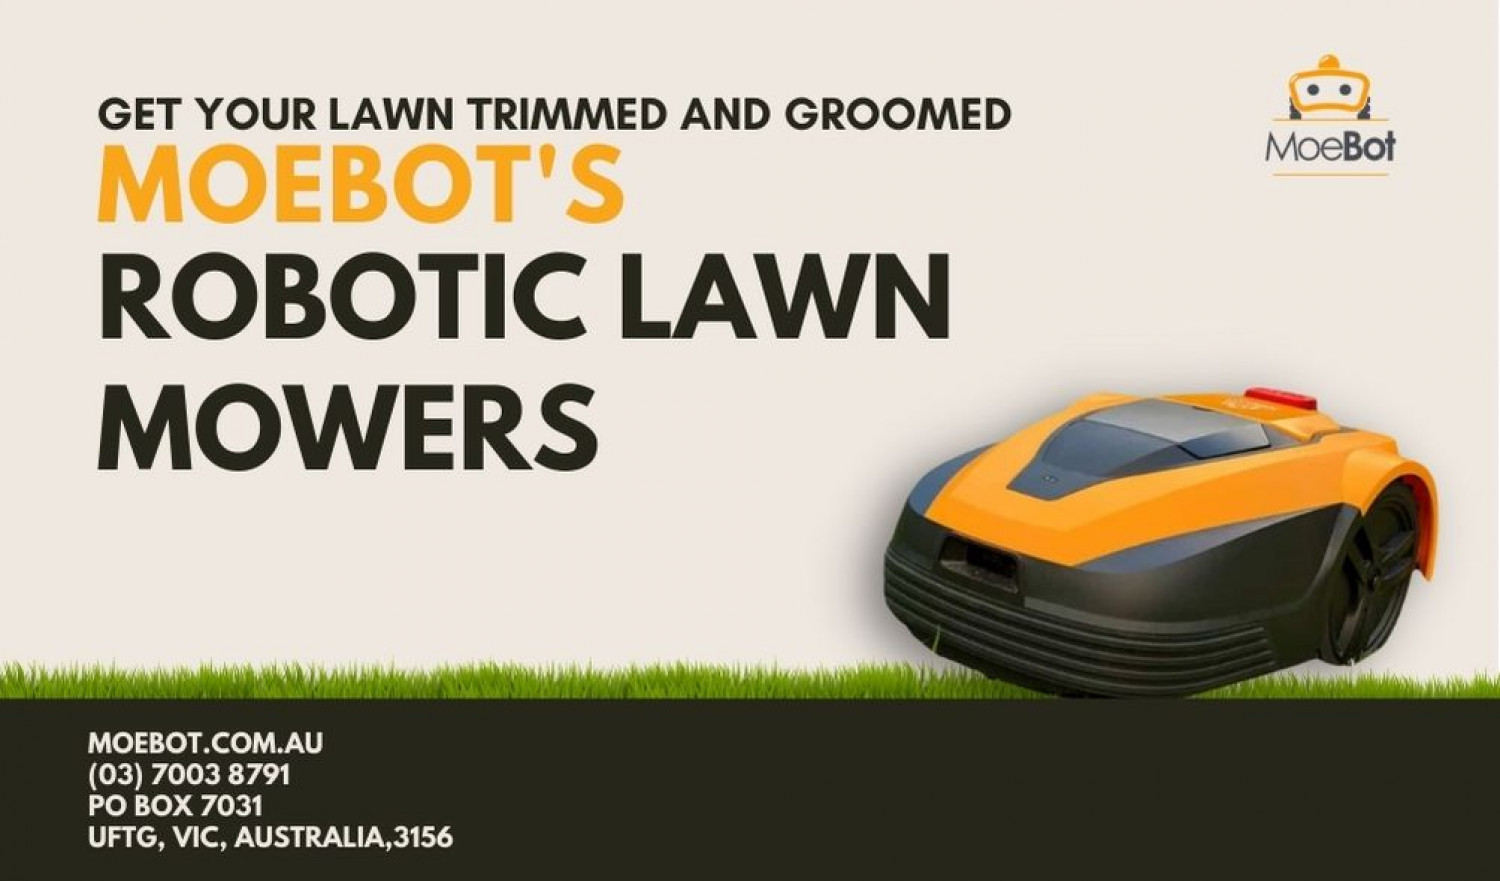 Buy Robot Lawn Mowers For Hassle-Free Gardening | Moebot Infographic